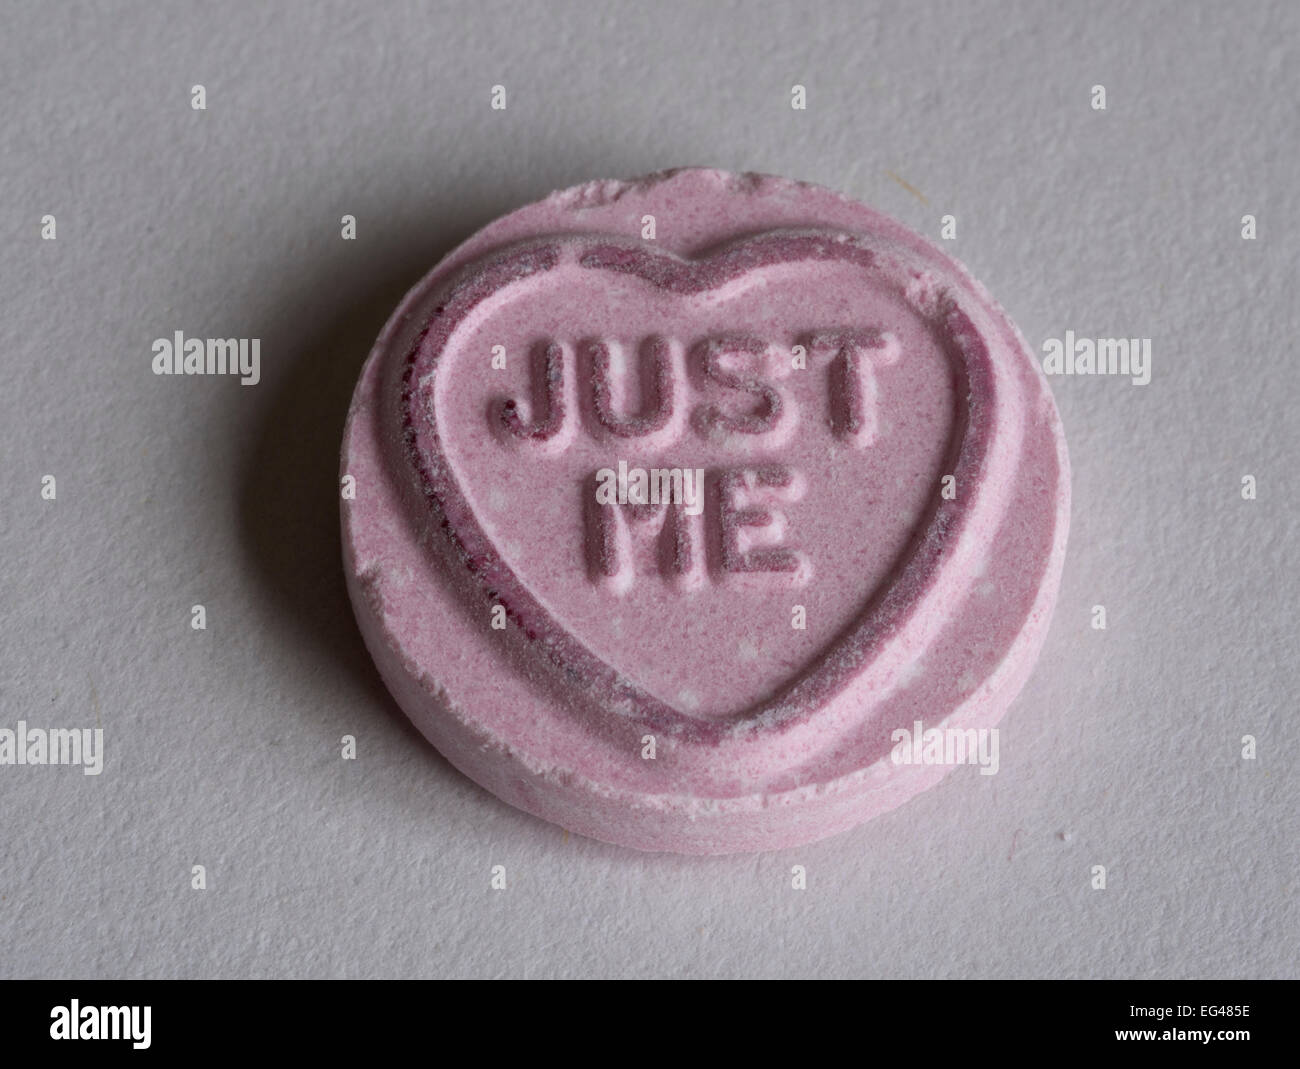 Love Hearts sweet with 'Just me' message. Stock Photo